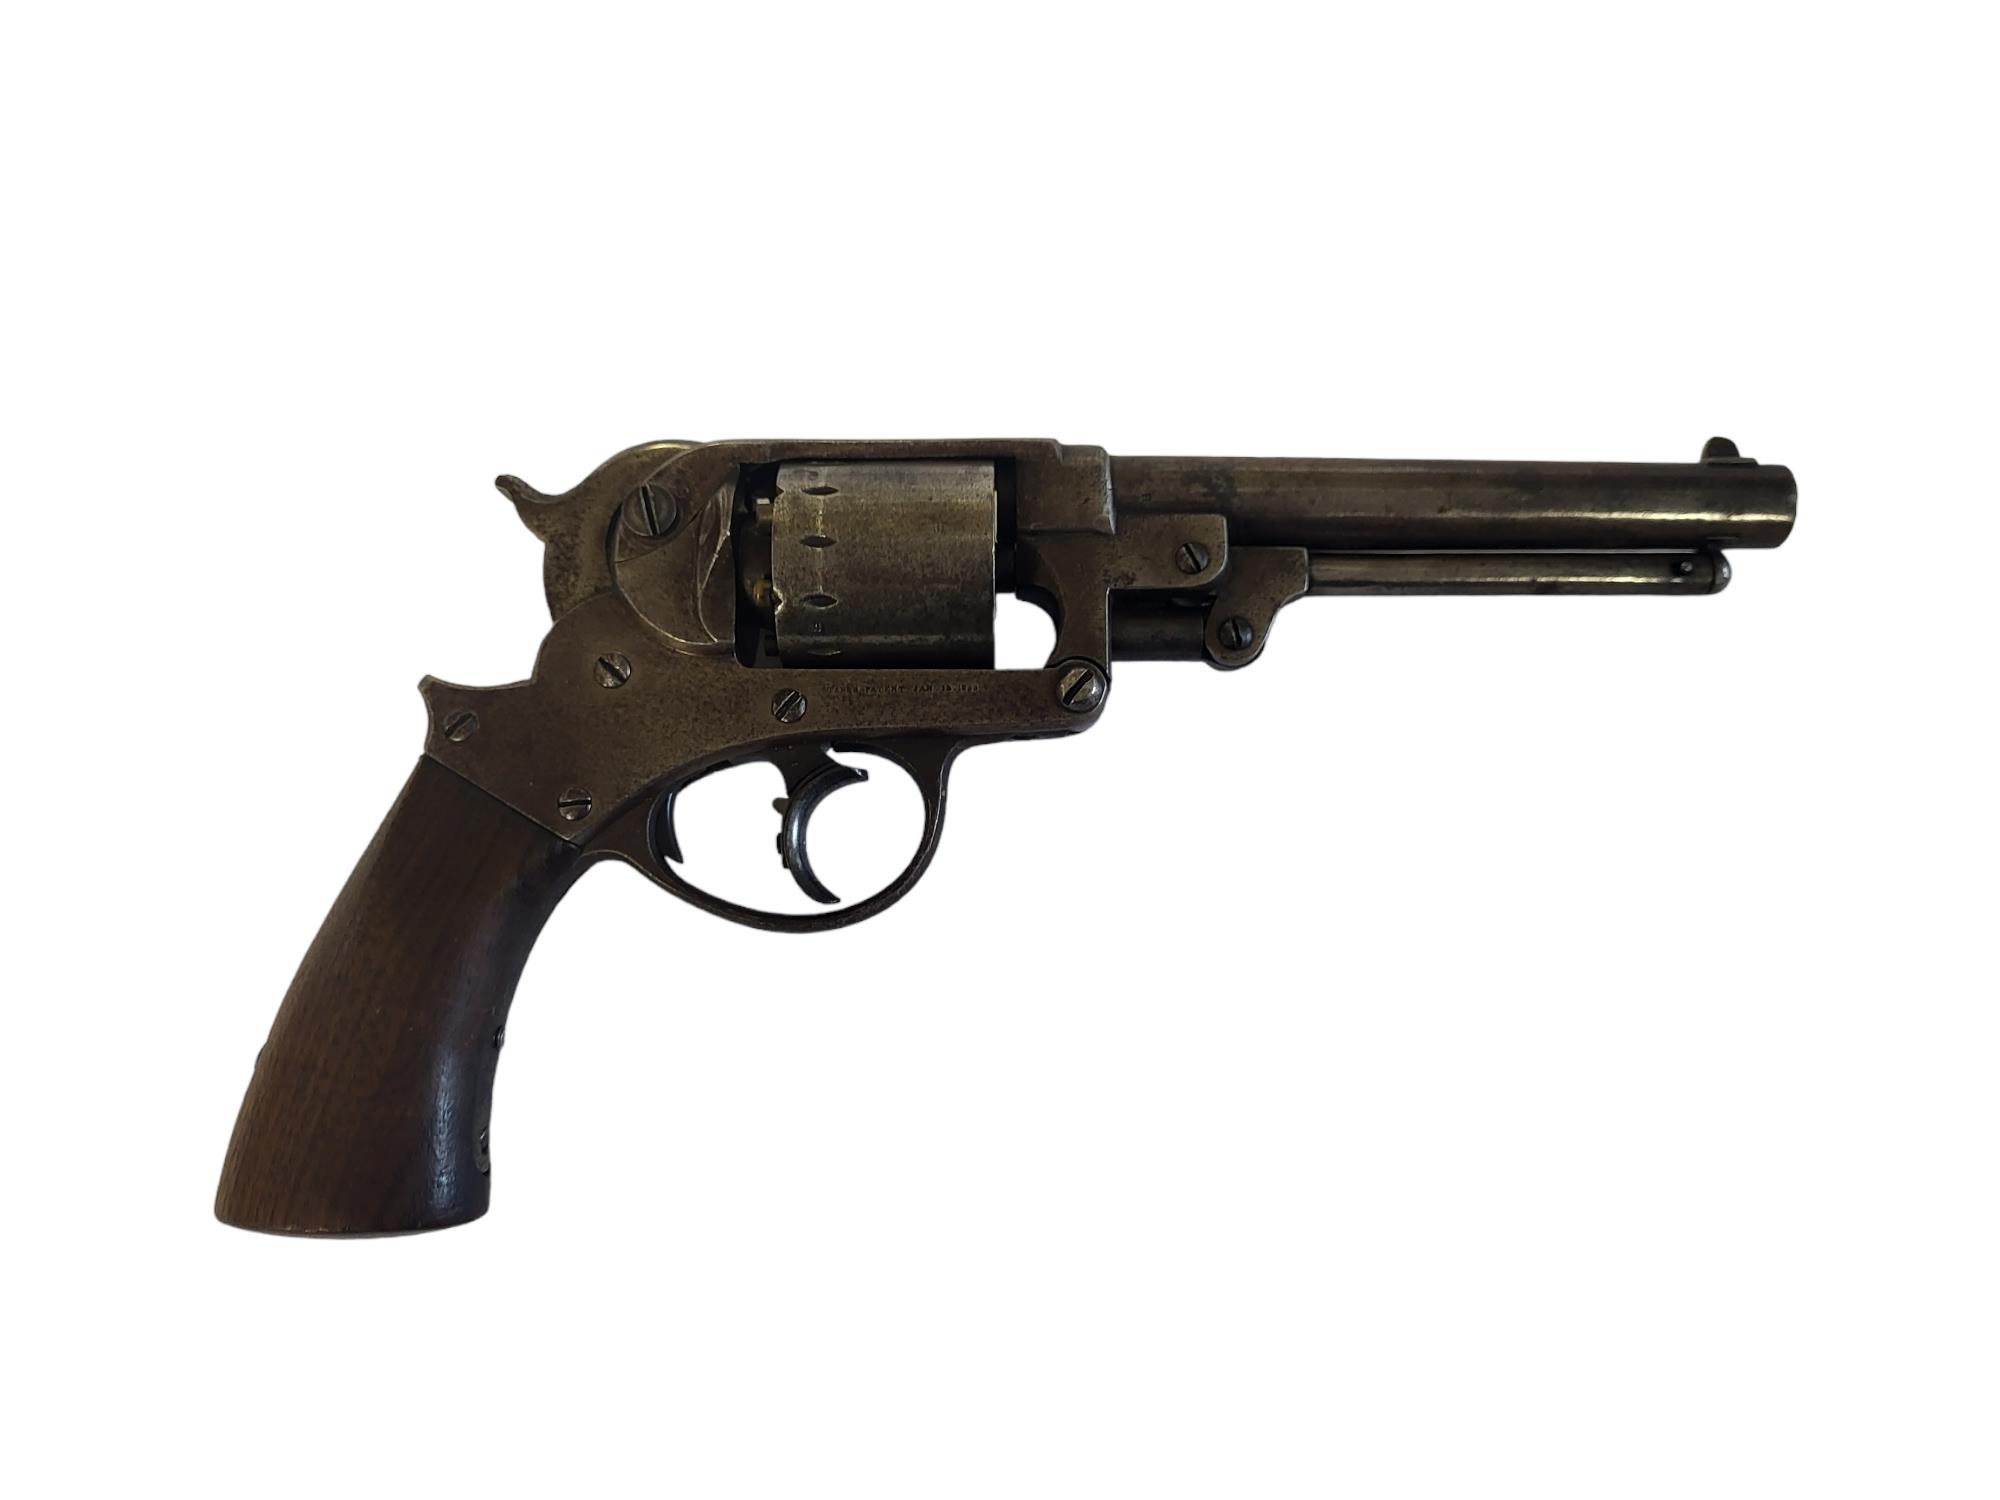 STARR ARMS COMPANY, NEW YORK, SIX SHOT DOUBLE ACTION PERCUSSION REVOLVER Army model 1858, serial